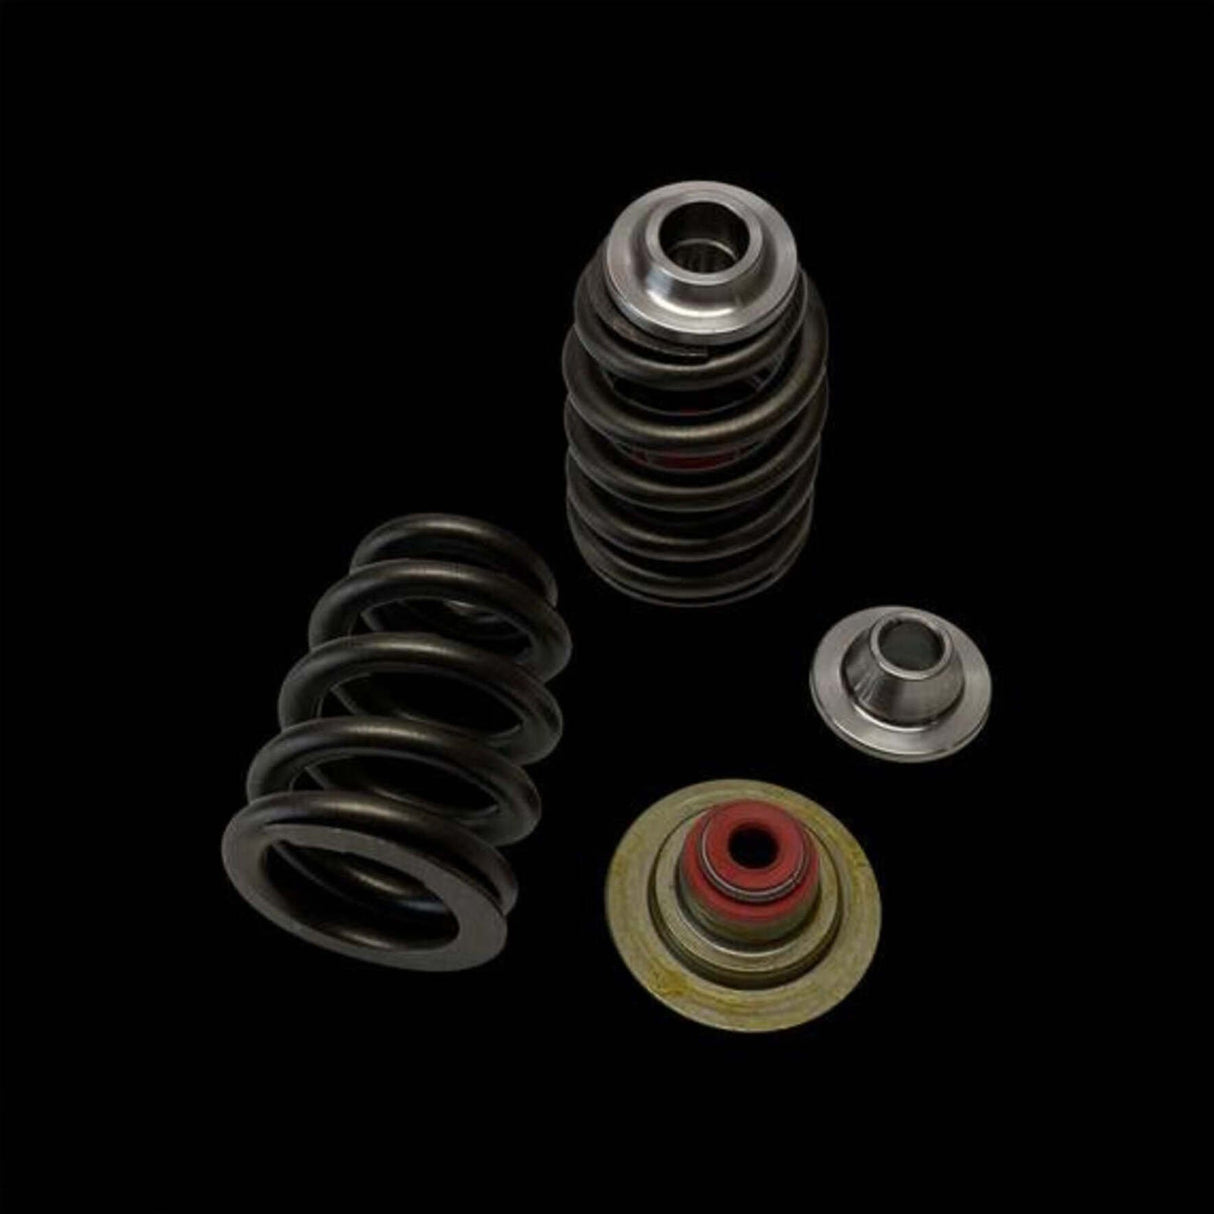 tpr-industry-x3-rotax-900-ace-beehive-spring-seat-kit